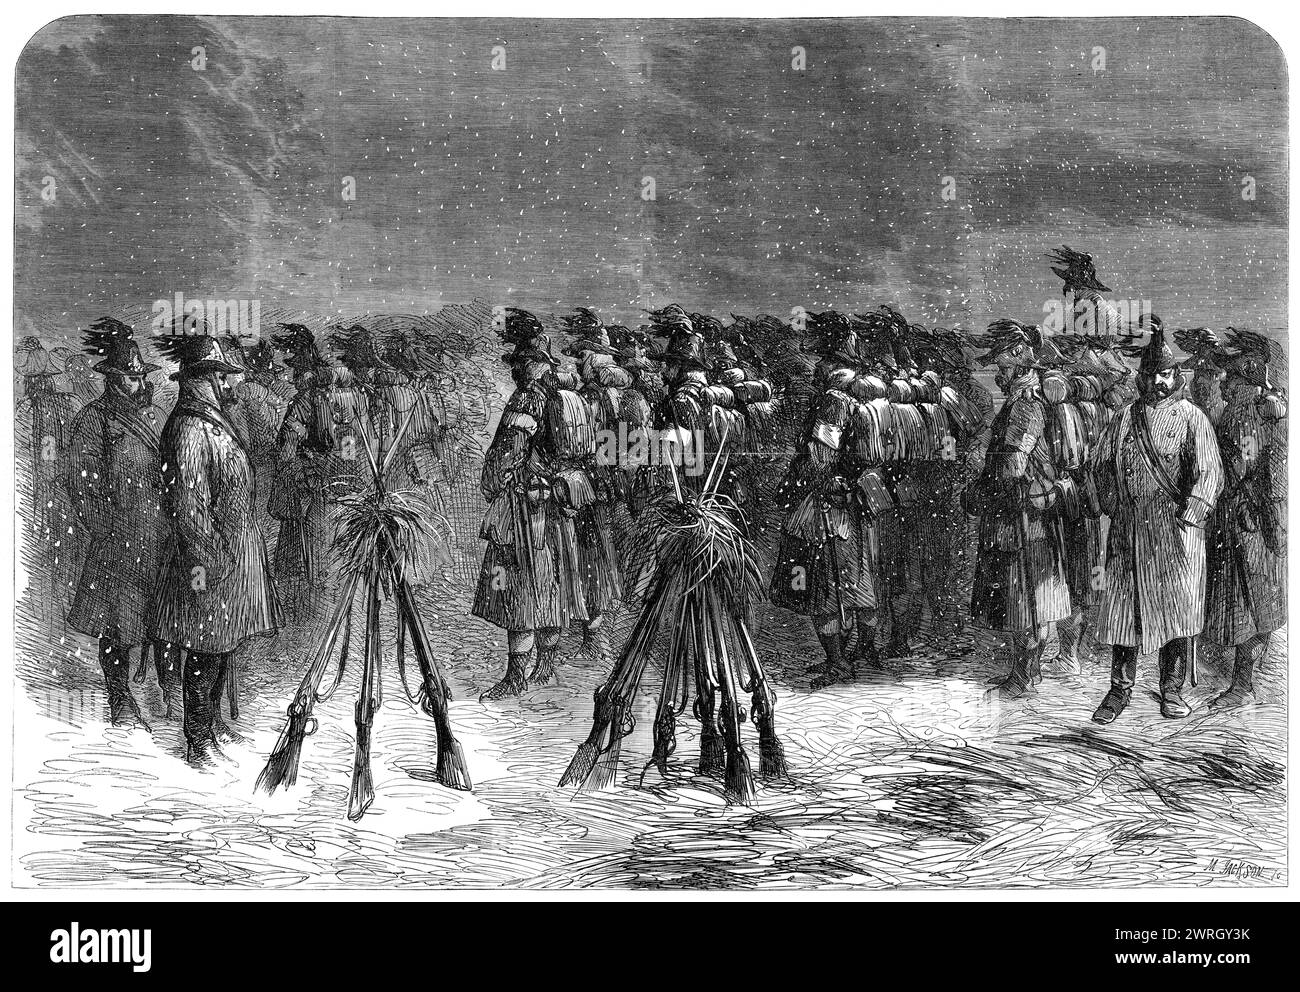 The War in Schleswig: Austrian camp in front of the Dannewerk: the 18th Bohemian Chasseurs in a snowstorm - from a sketch by our special artist, 1864. 'The country between Breckendorf and Over-Selk was of the bleakest and most inhospitable description...Hedges there were none, as the Danes had cut down what few there existed previously to their retreat. The villages and farmhouses are few in number and at wide distances from each other... The snow lay an inch and a half deep on the ground when we arrived, and the temperature was not a degree above zero. As we afterwards learnt from the officer Stock Photo